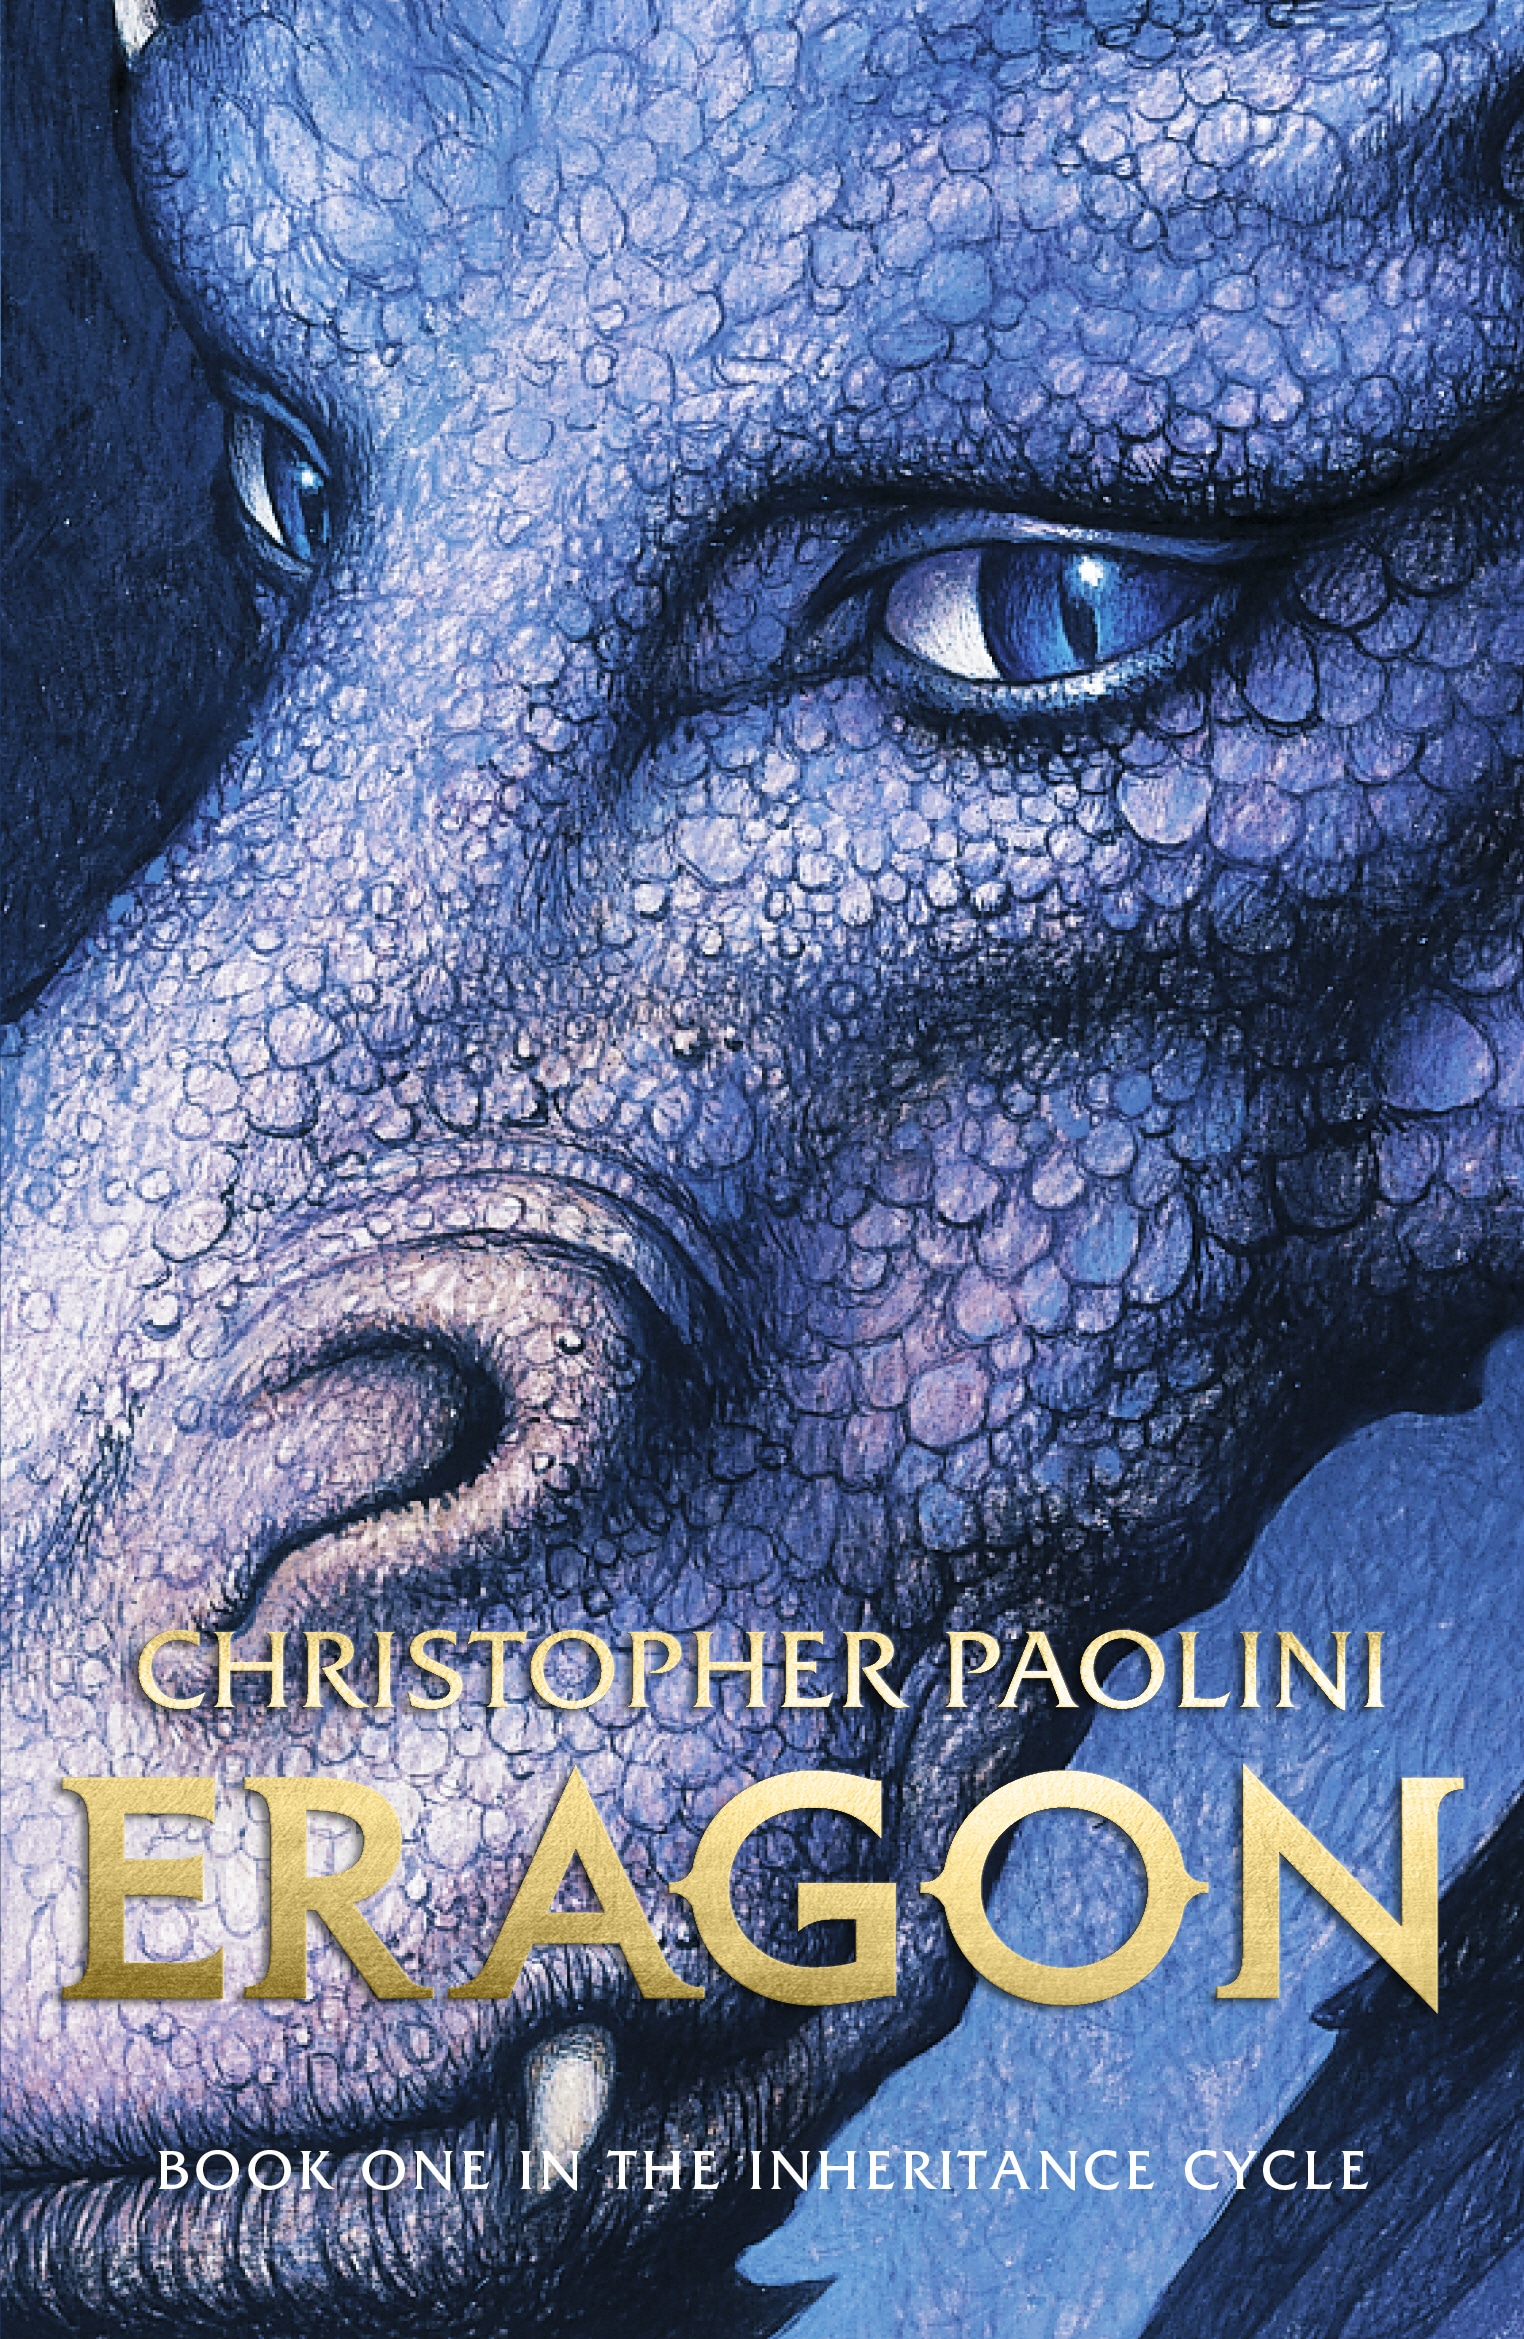 Book “Eragon” by Christopher Paolini — January 6, 2005